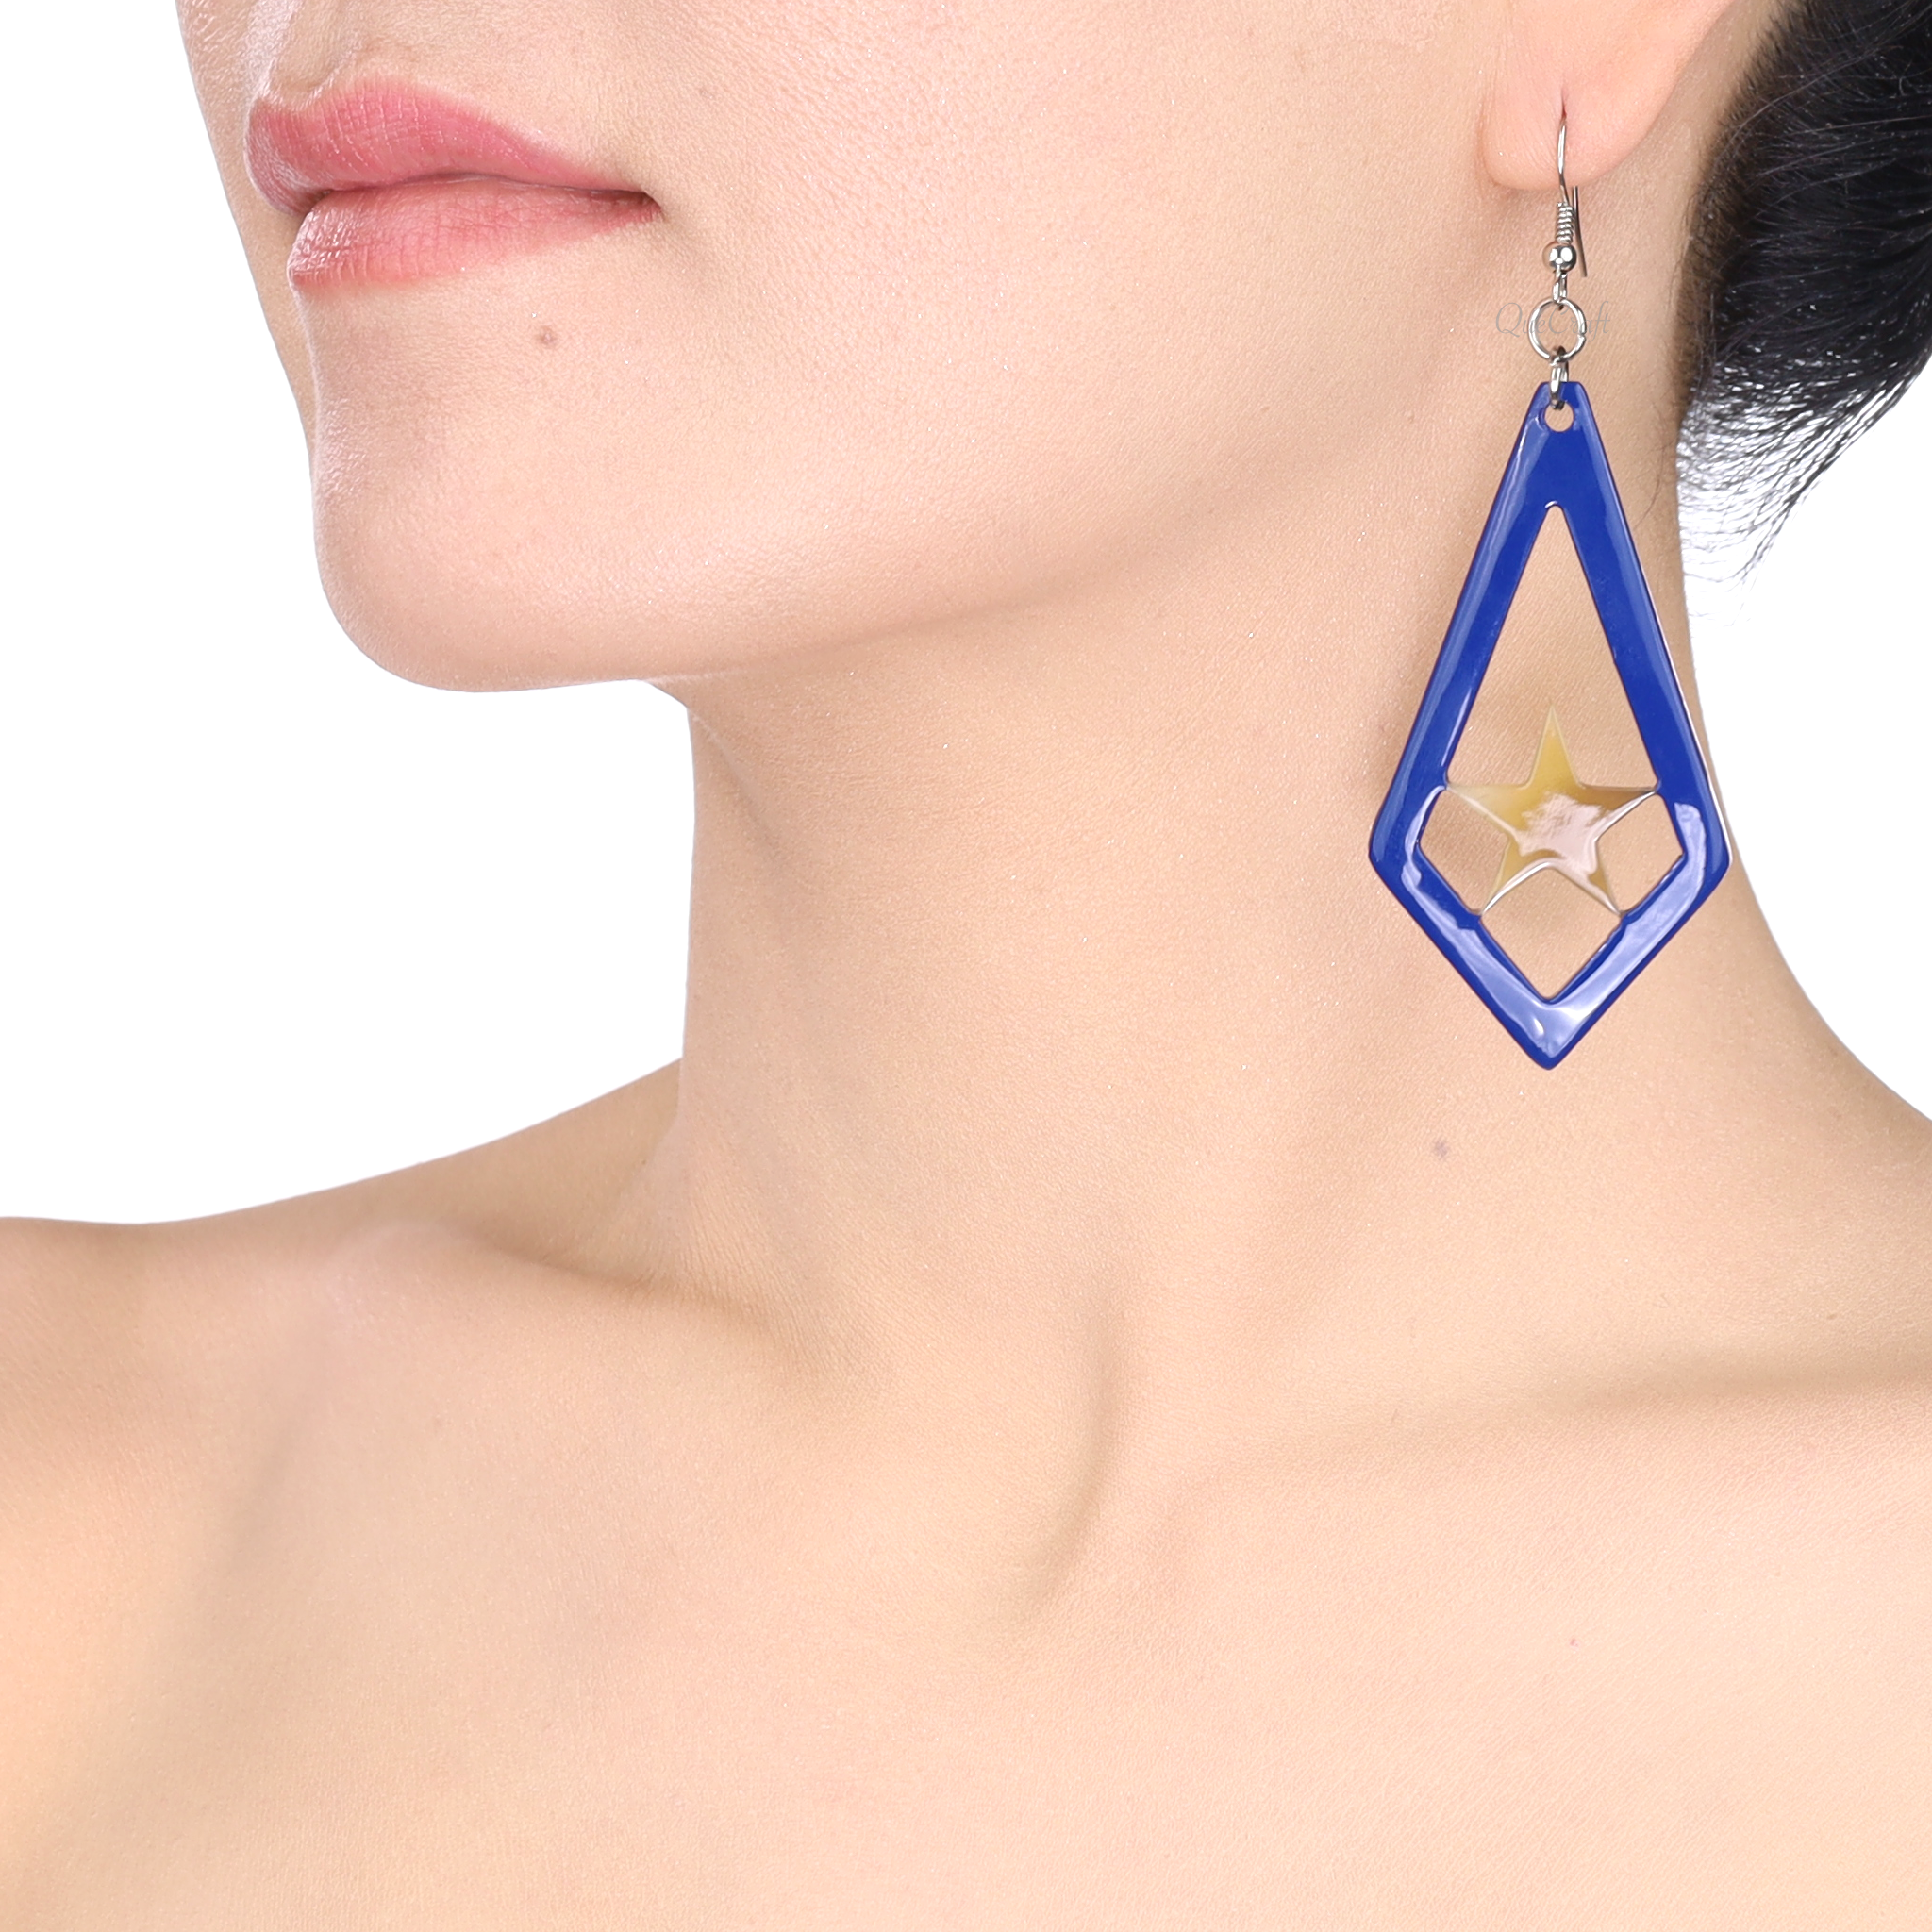 Horn & Lacquer Earrings #13892 - HORN JEWELRY